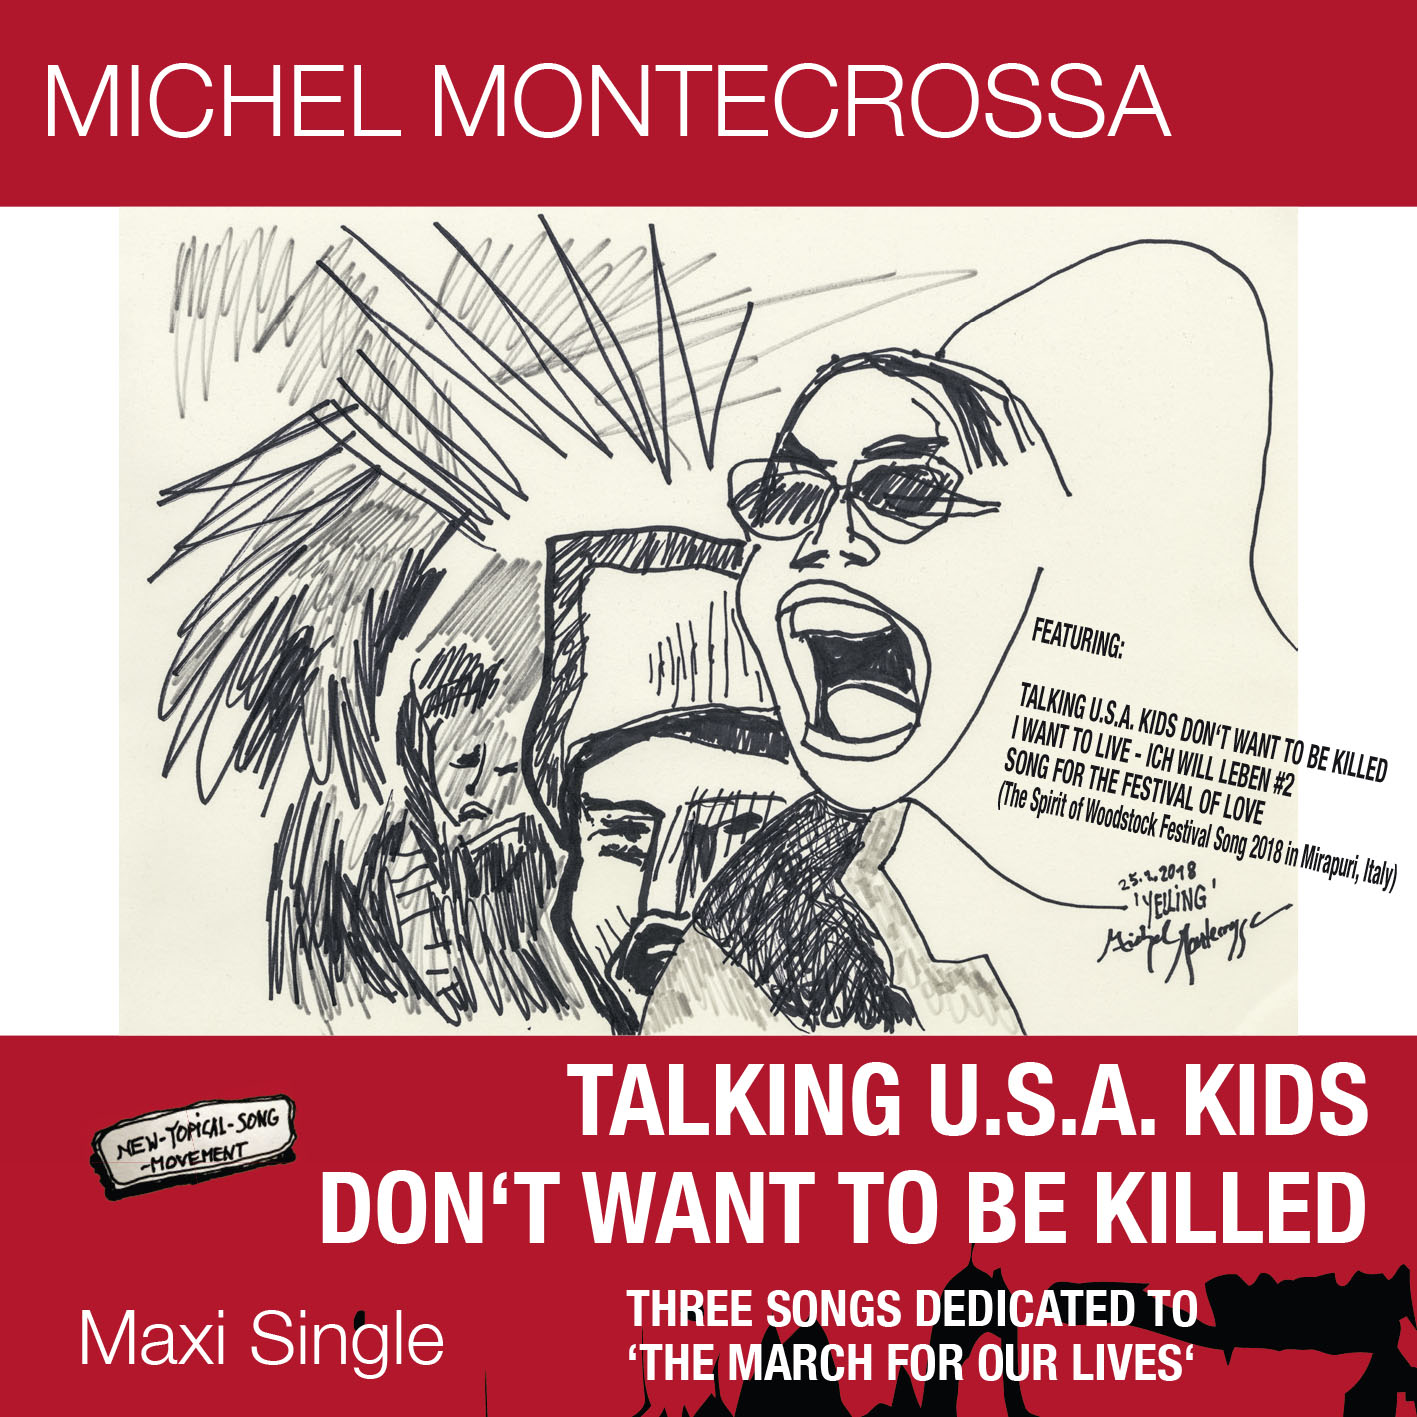 Talking U.S.A. Kids Don't Want To Be Killed